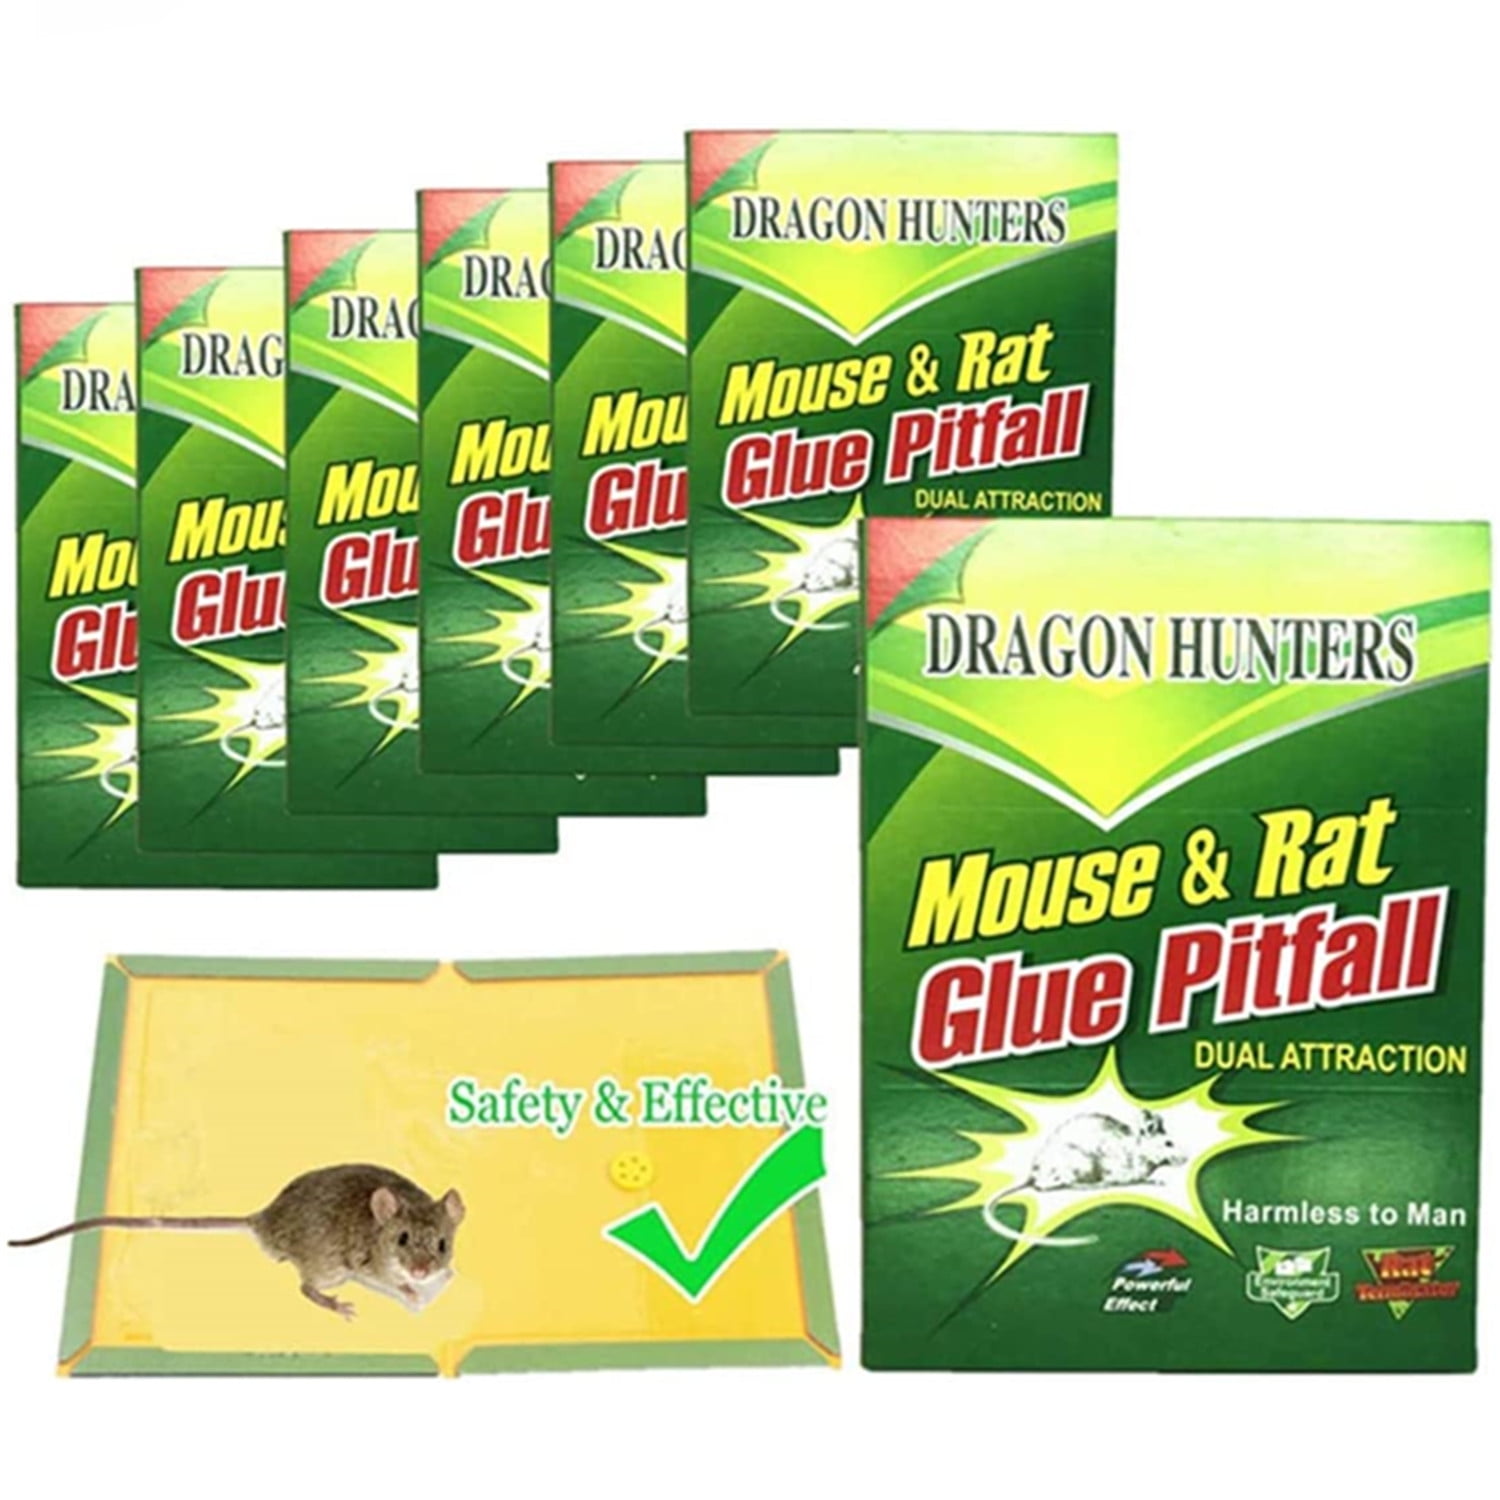 Glue trap mouse trap 24cm, CATEGORIES \ House \ Others